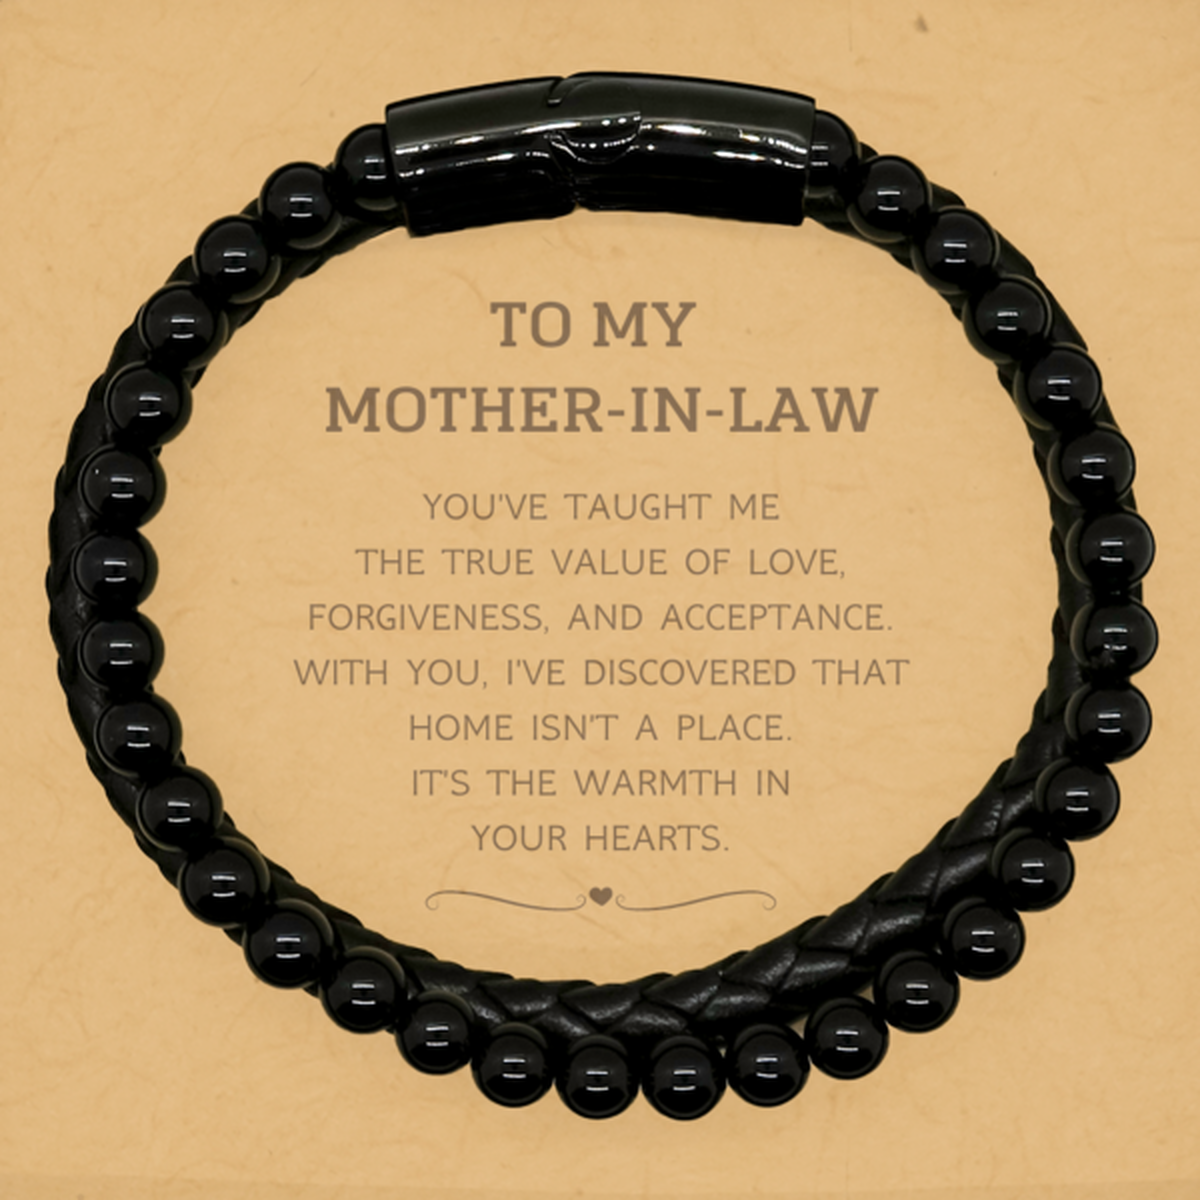 To My Mother-In-Law Gifts, You've taught me the true value of love, Thank You Gifts For Mother-In-Law, Birthday Stone Leather Bracelets For Mother-In-Law